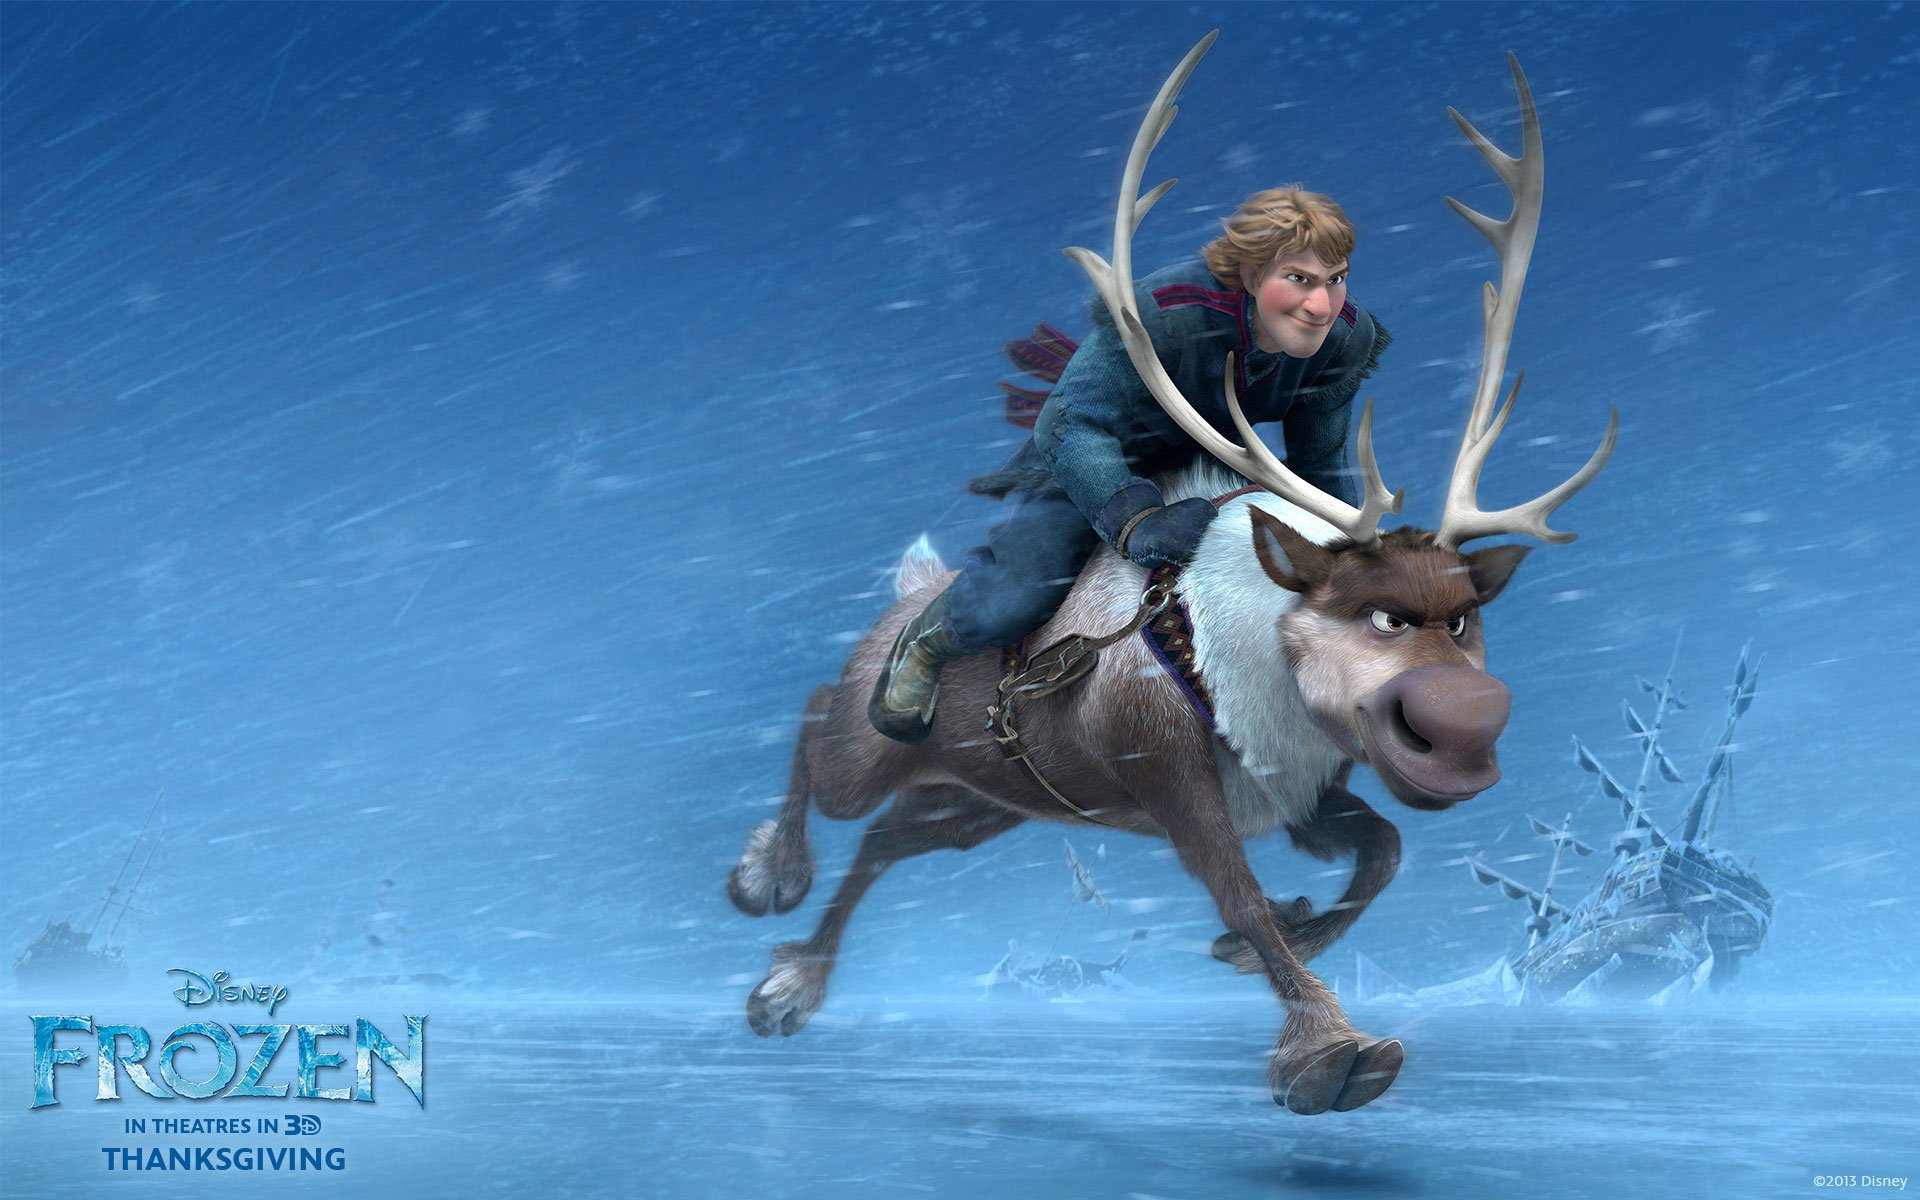 Frozen 2013 Movie Wallpapers HD Facebook Timeline Covers